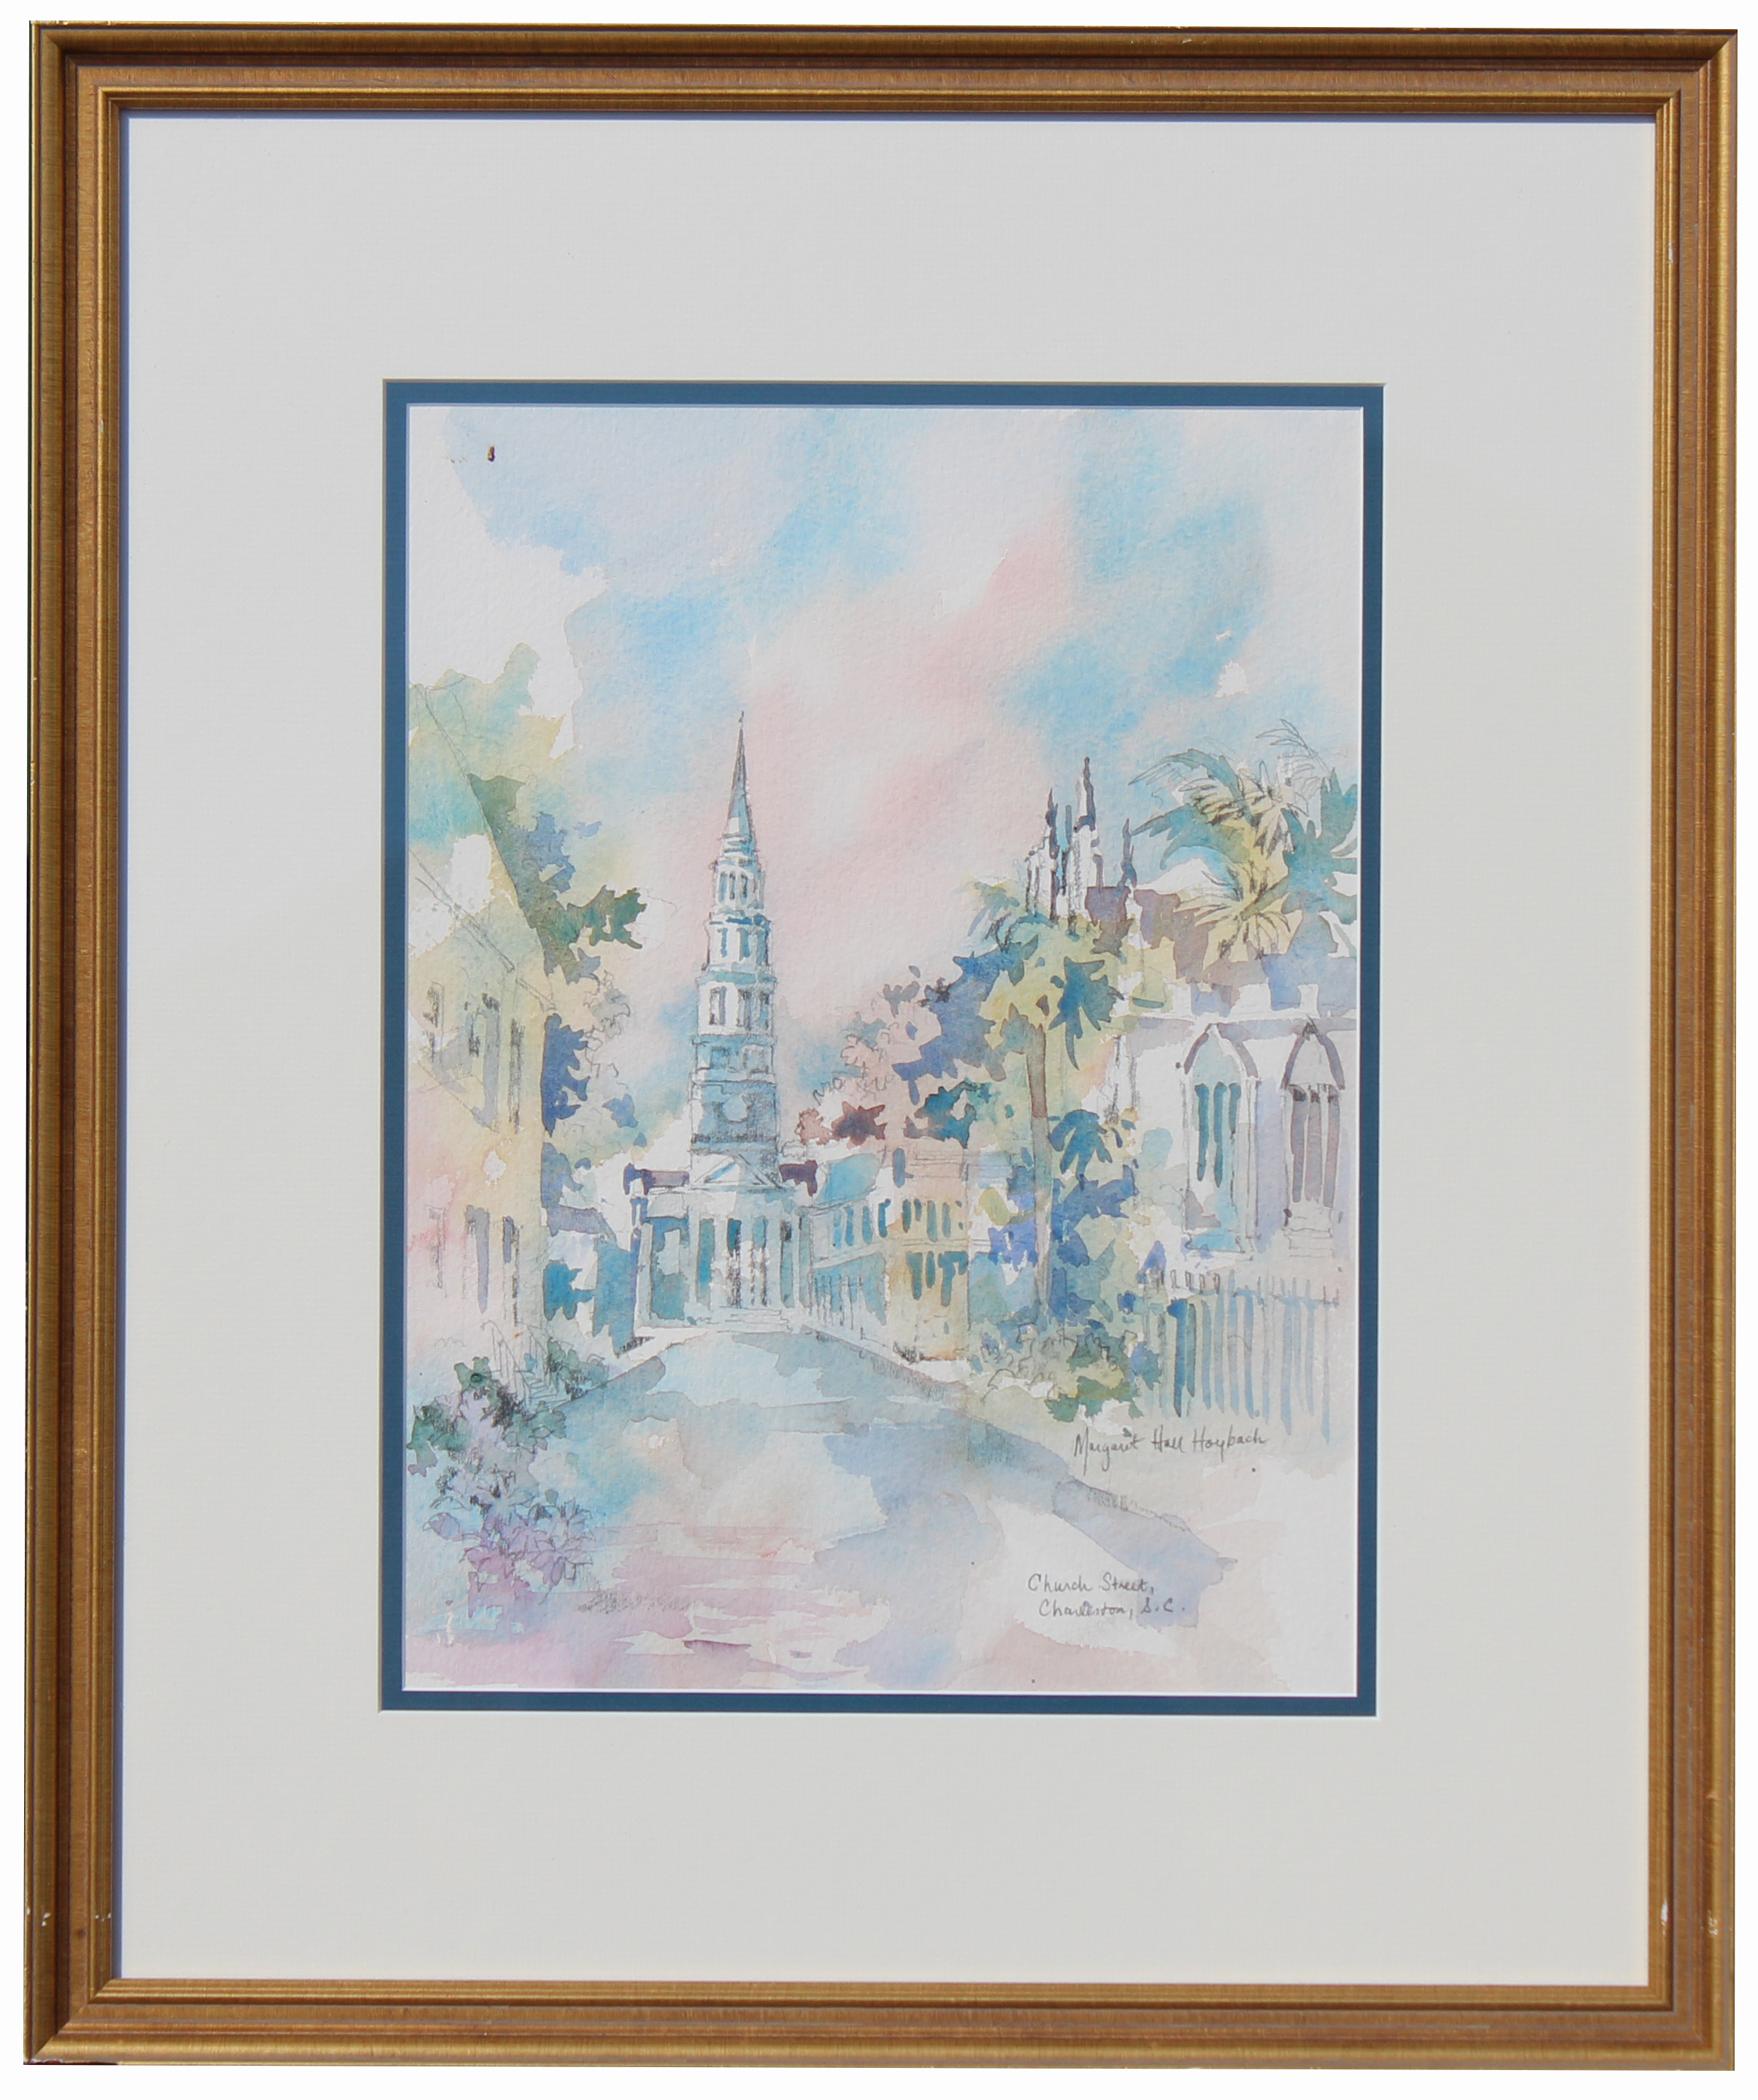 Margaret Hall Hoybach (District of COlumbia, South Carolina, 20th Century) Watercolor of Church